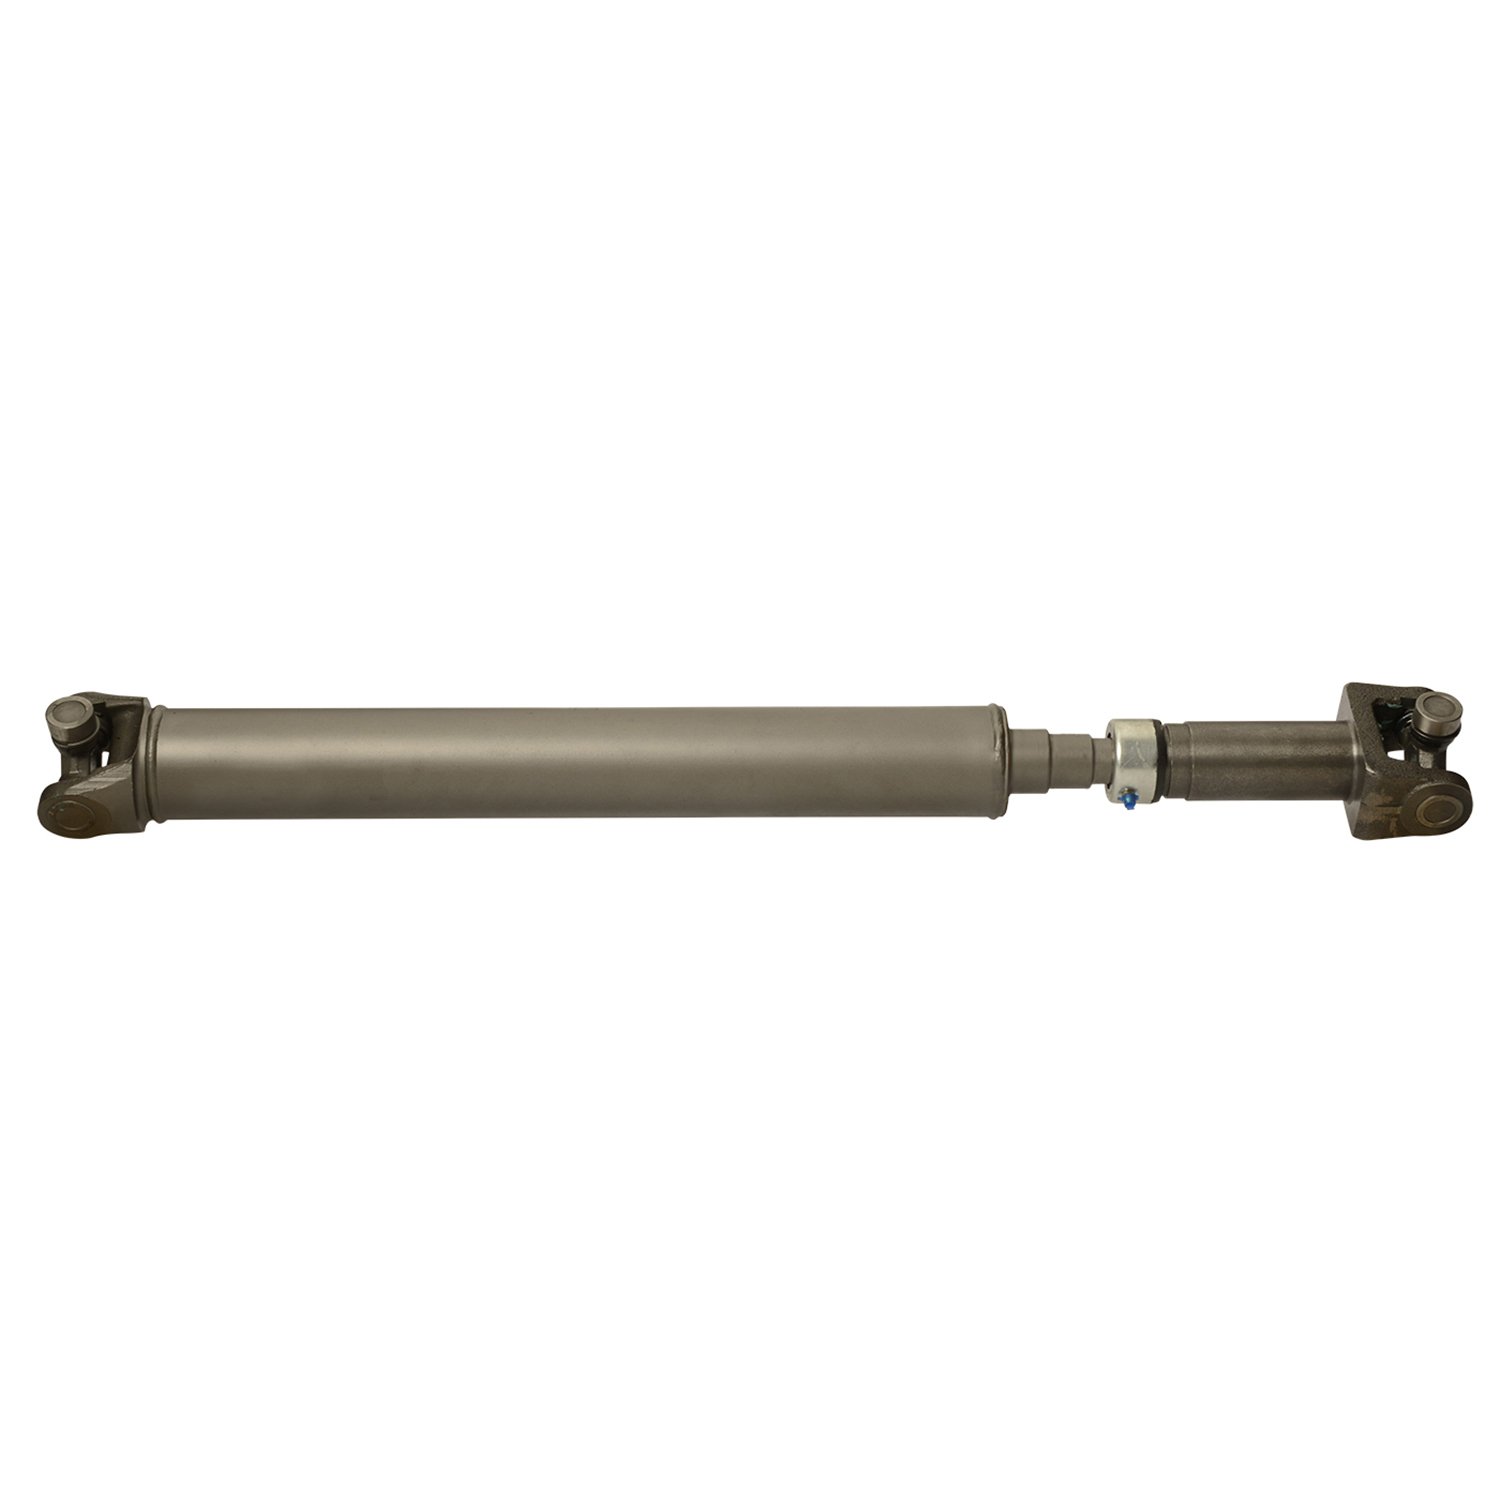 USA Standard ZDS9441 Front Driveshaft, For Bronco/F-Series Trucks, 34.5 in. Center-To-Center